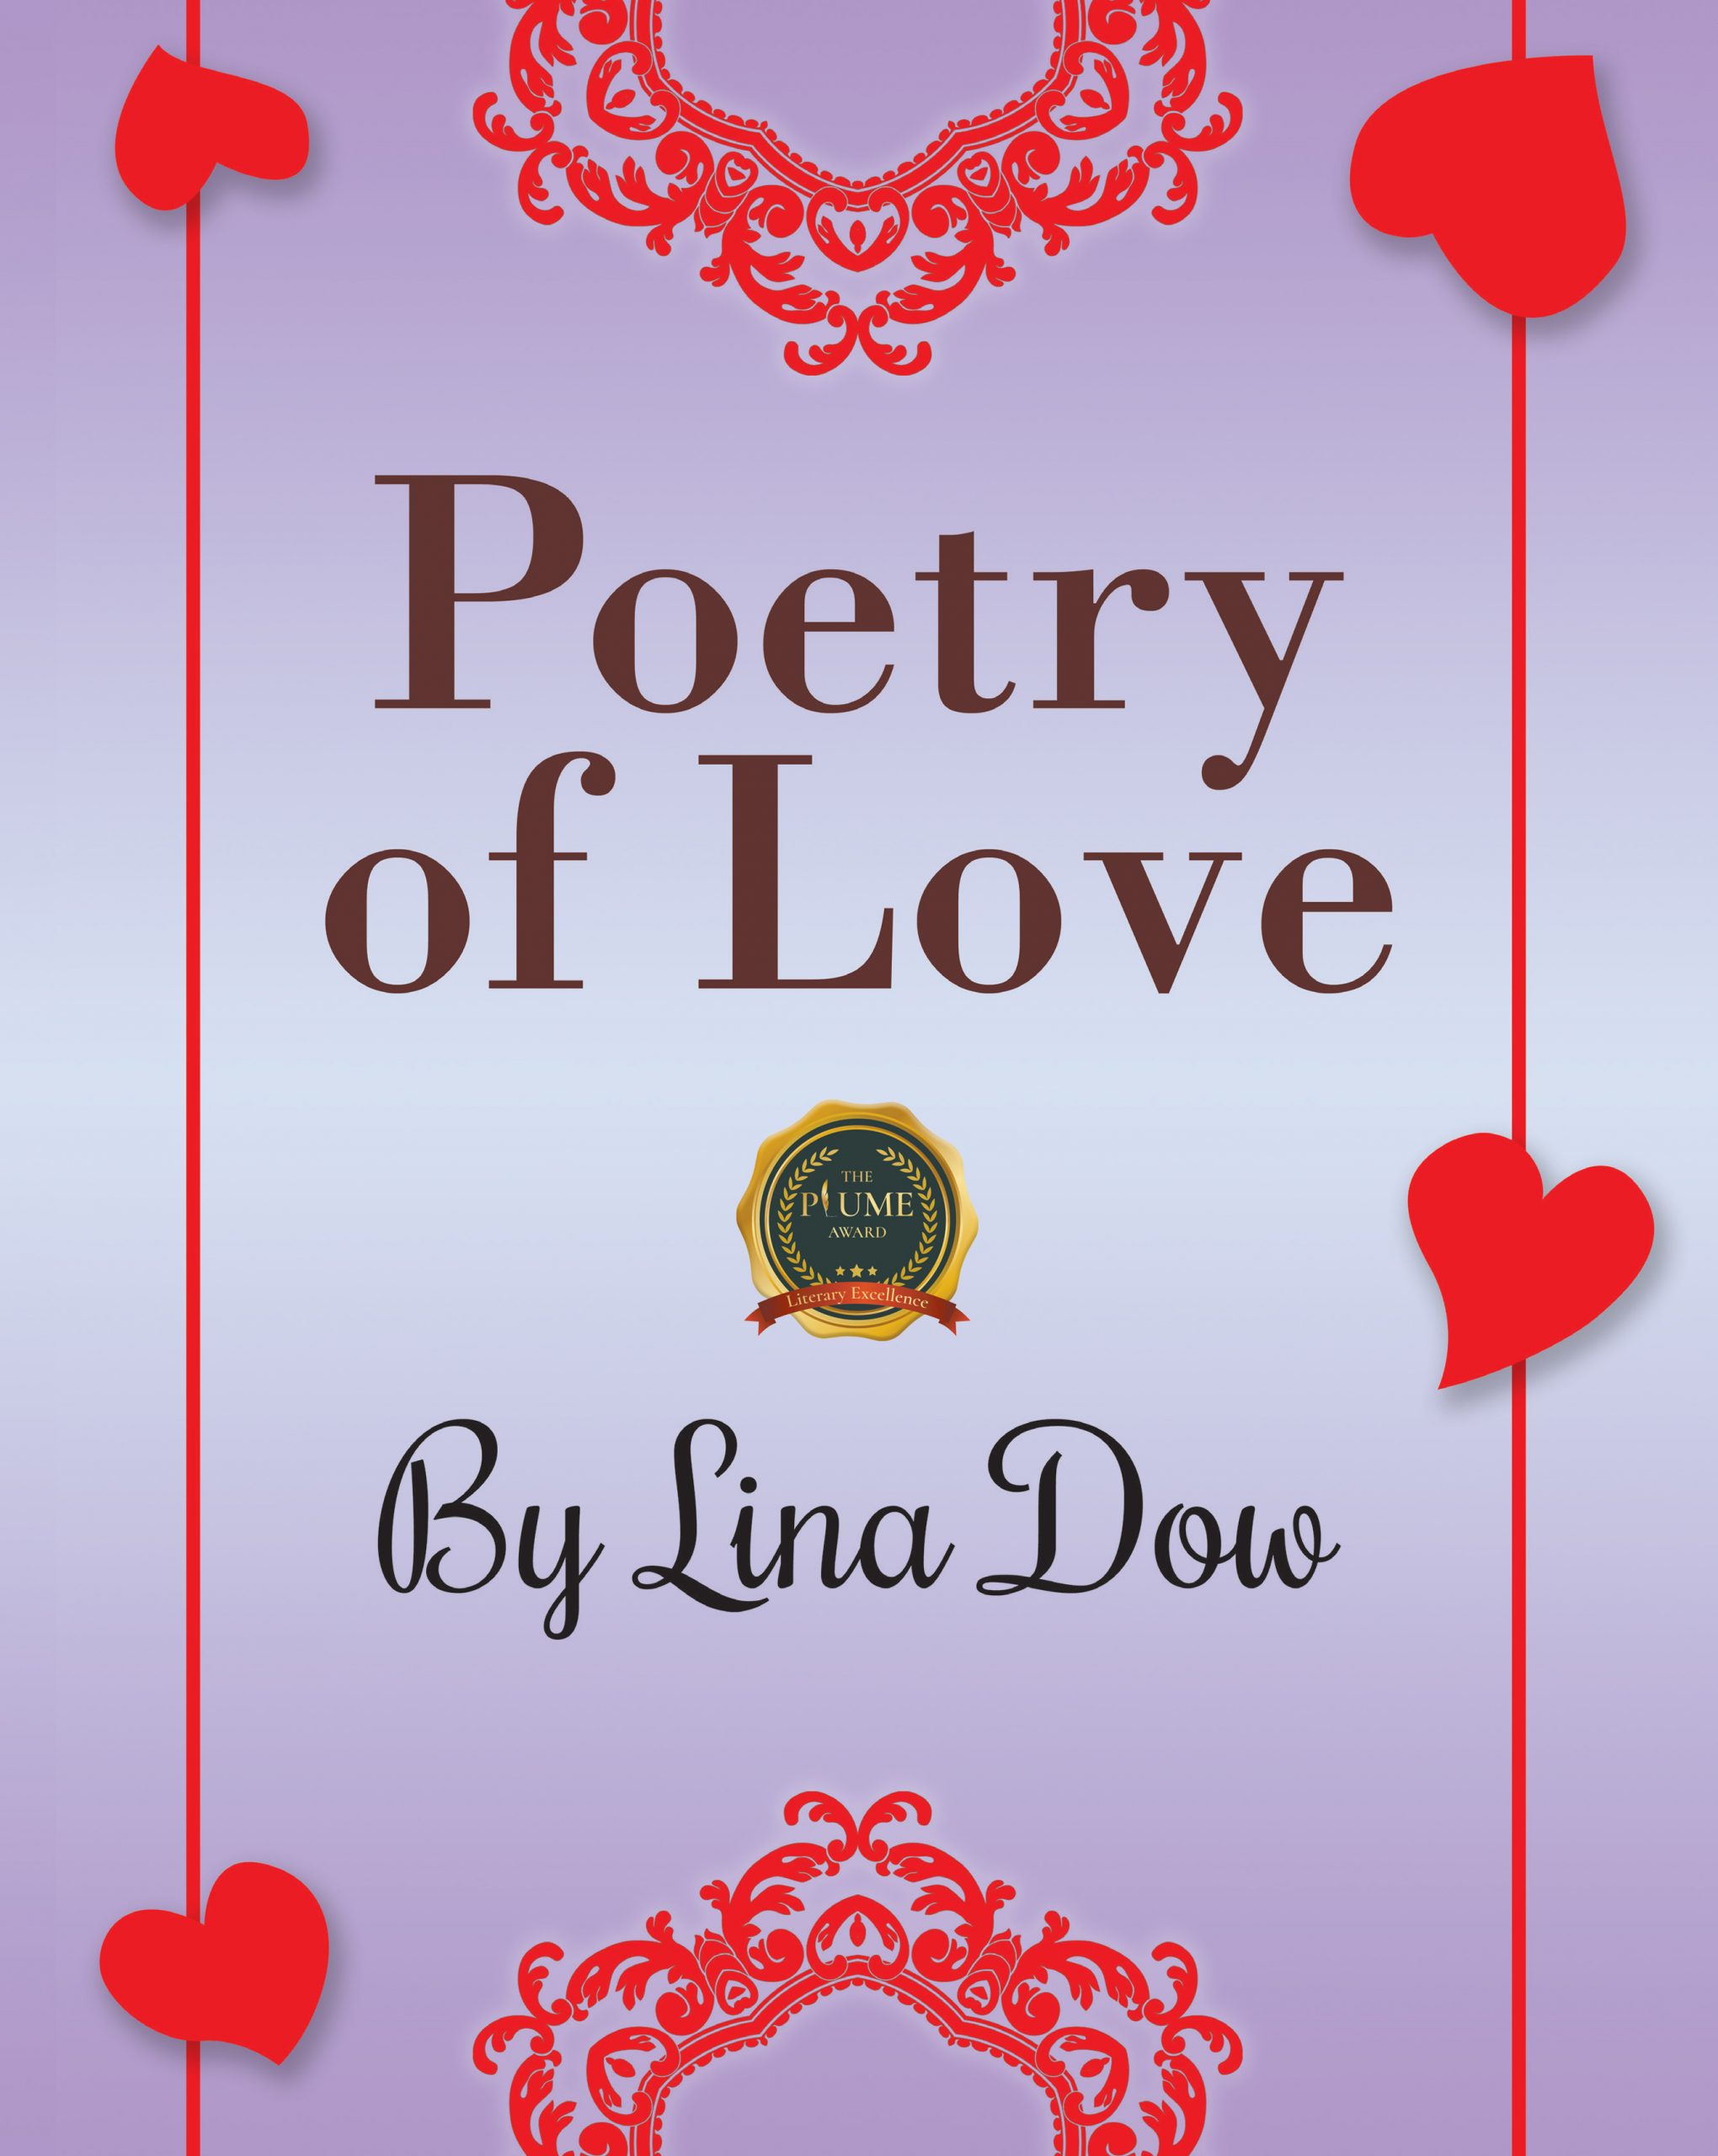 Poetry of Love by Lina Dow